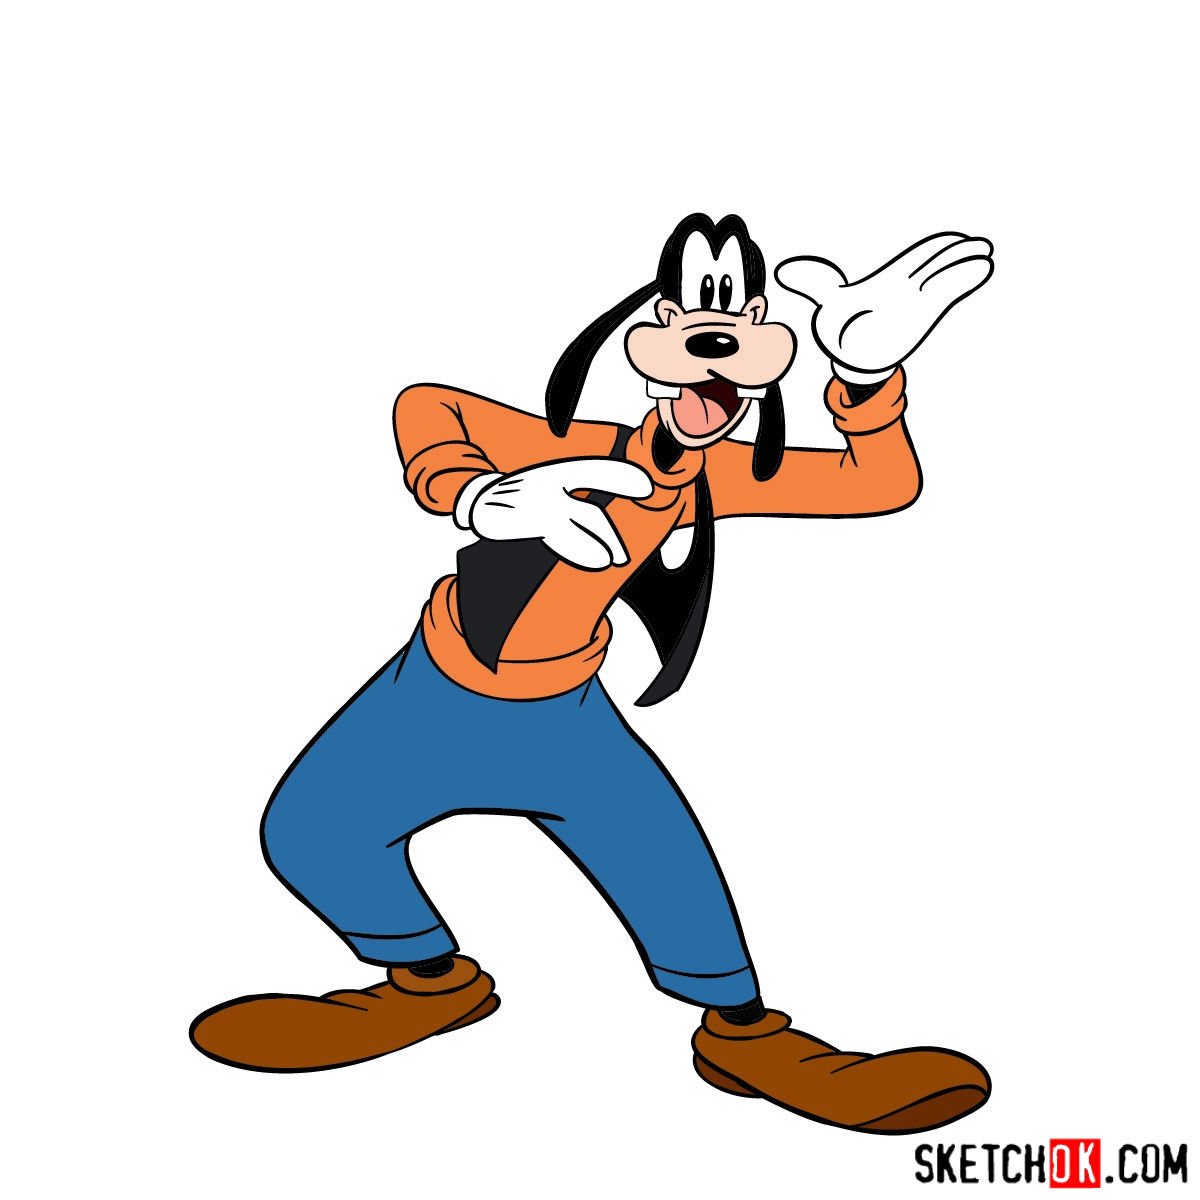 How to draw Goofy